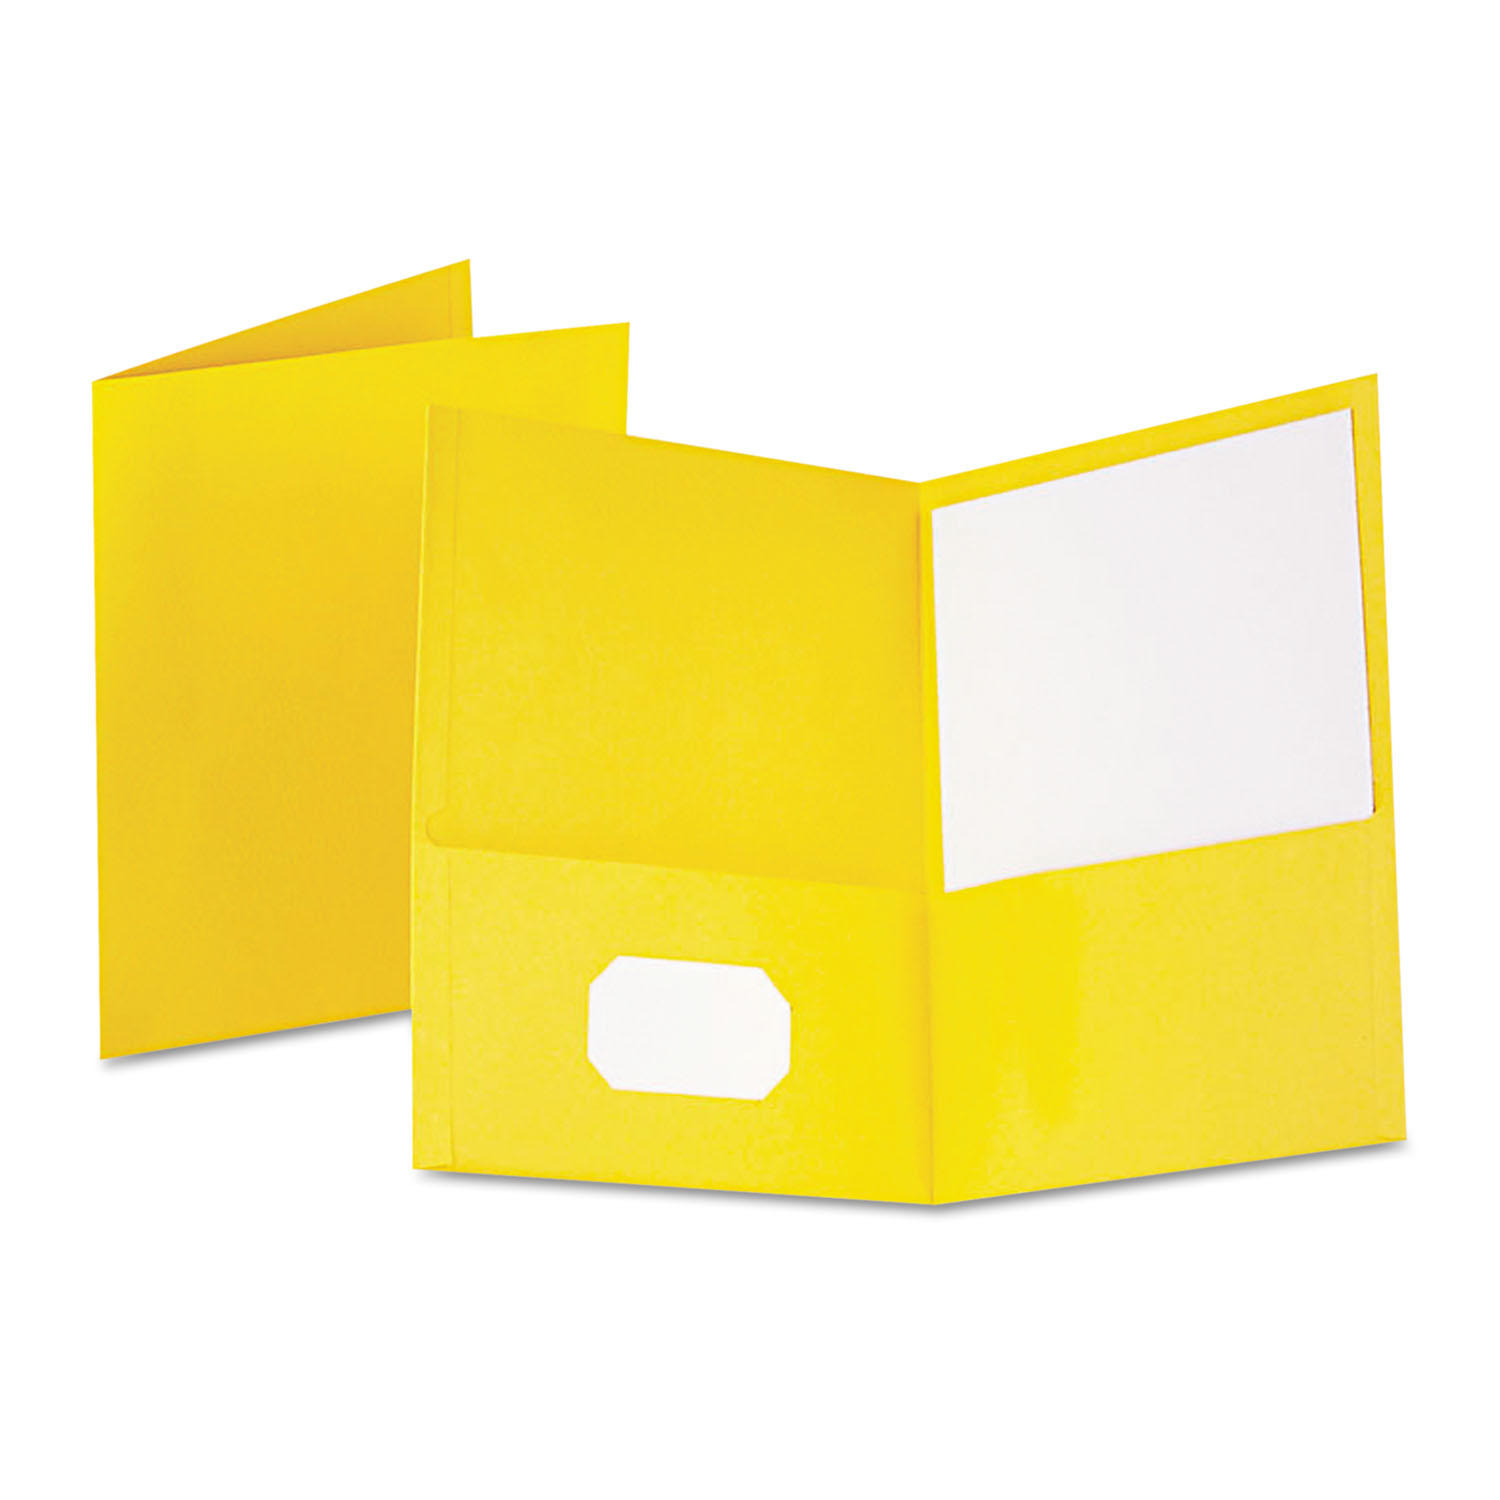 Oxford Letter Recycled Pocket Folder - 8 1/2" x 11" - 100 Sheet Capacity - 2 Internal Pocket(s) - Leatherette Paper - Yellow - 1